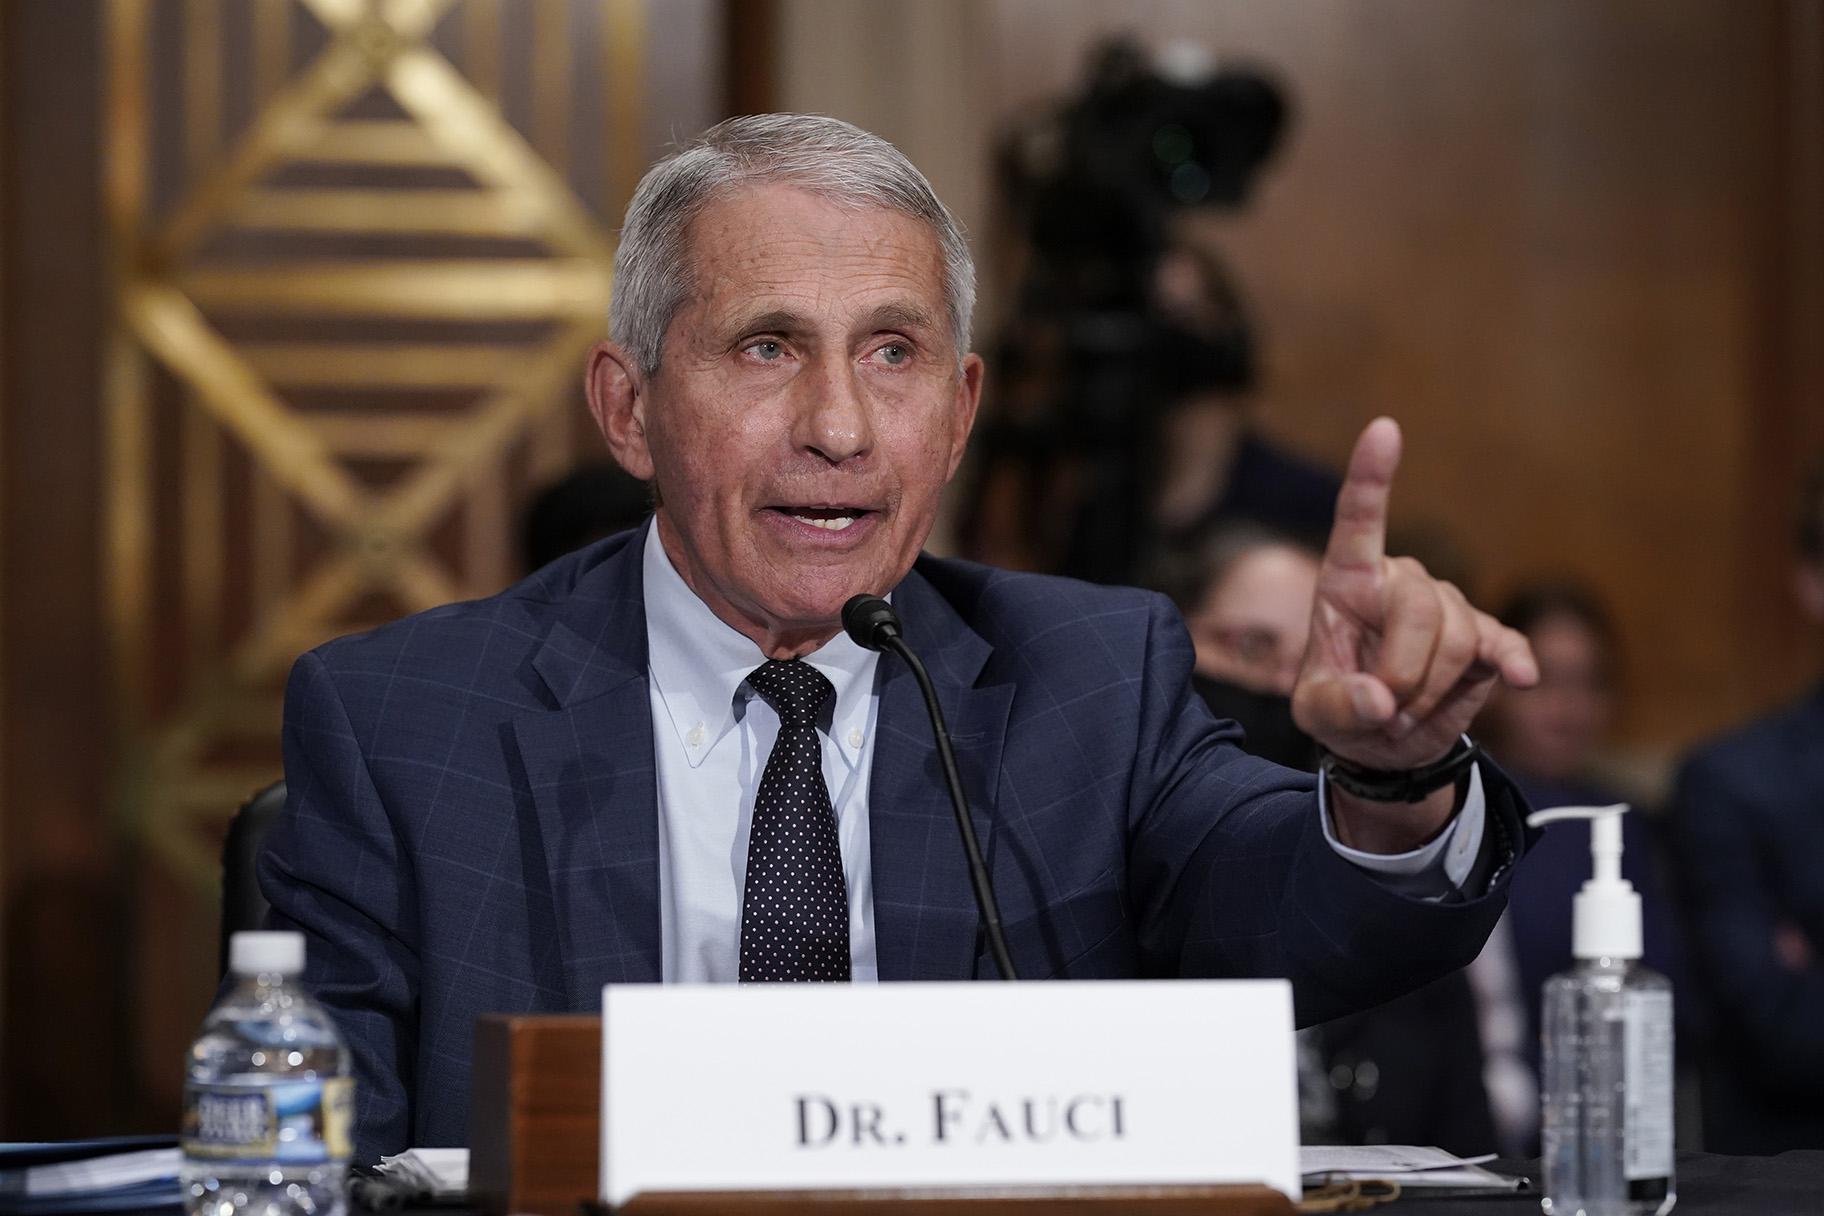 Top infectious disease expert Dr. Anthony Fauci responds to accusations by Sen. Rand Paul, R-Ky., as he testifies before the Senate Health, Education, Labor, and Pensions Committee, on Capitol Hill in Washington, Tuesday, July 20, 2021. (AP Photo / J. Scott Applewhite, Pool)